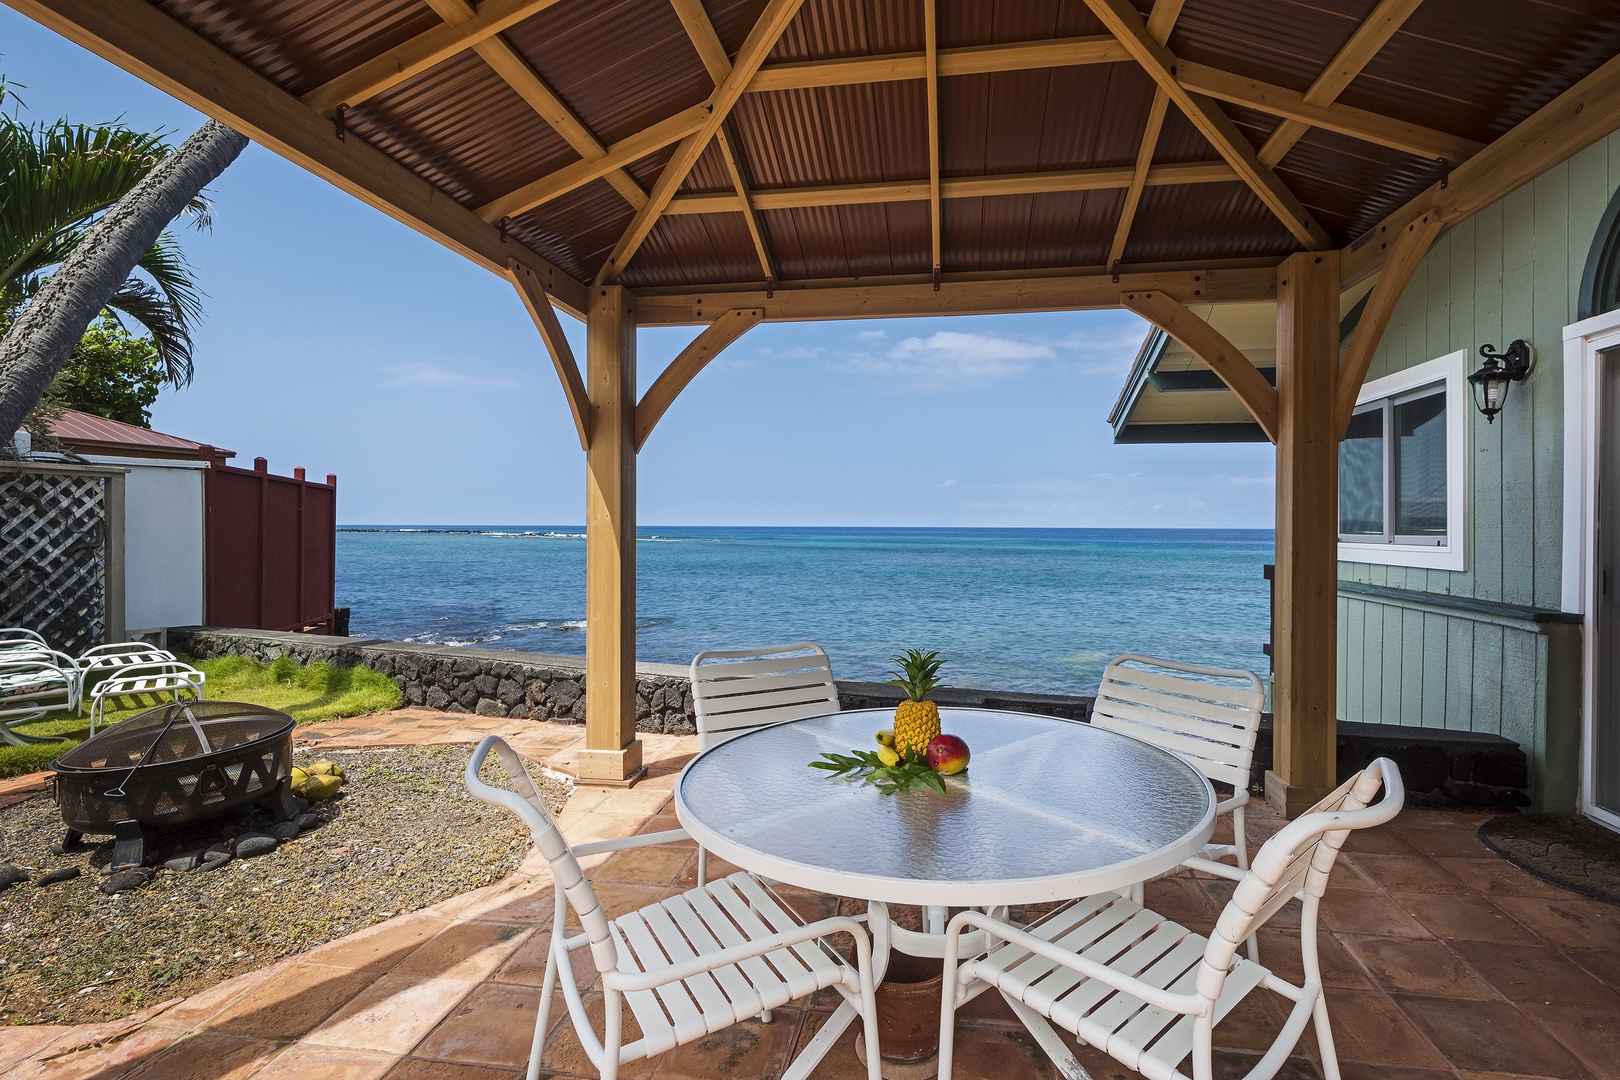 Kailua Kona Vacation Rentals, The Cottage - Outdoor covered space for enjoying BBQ'ed meals!